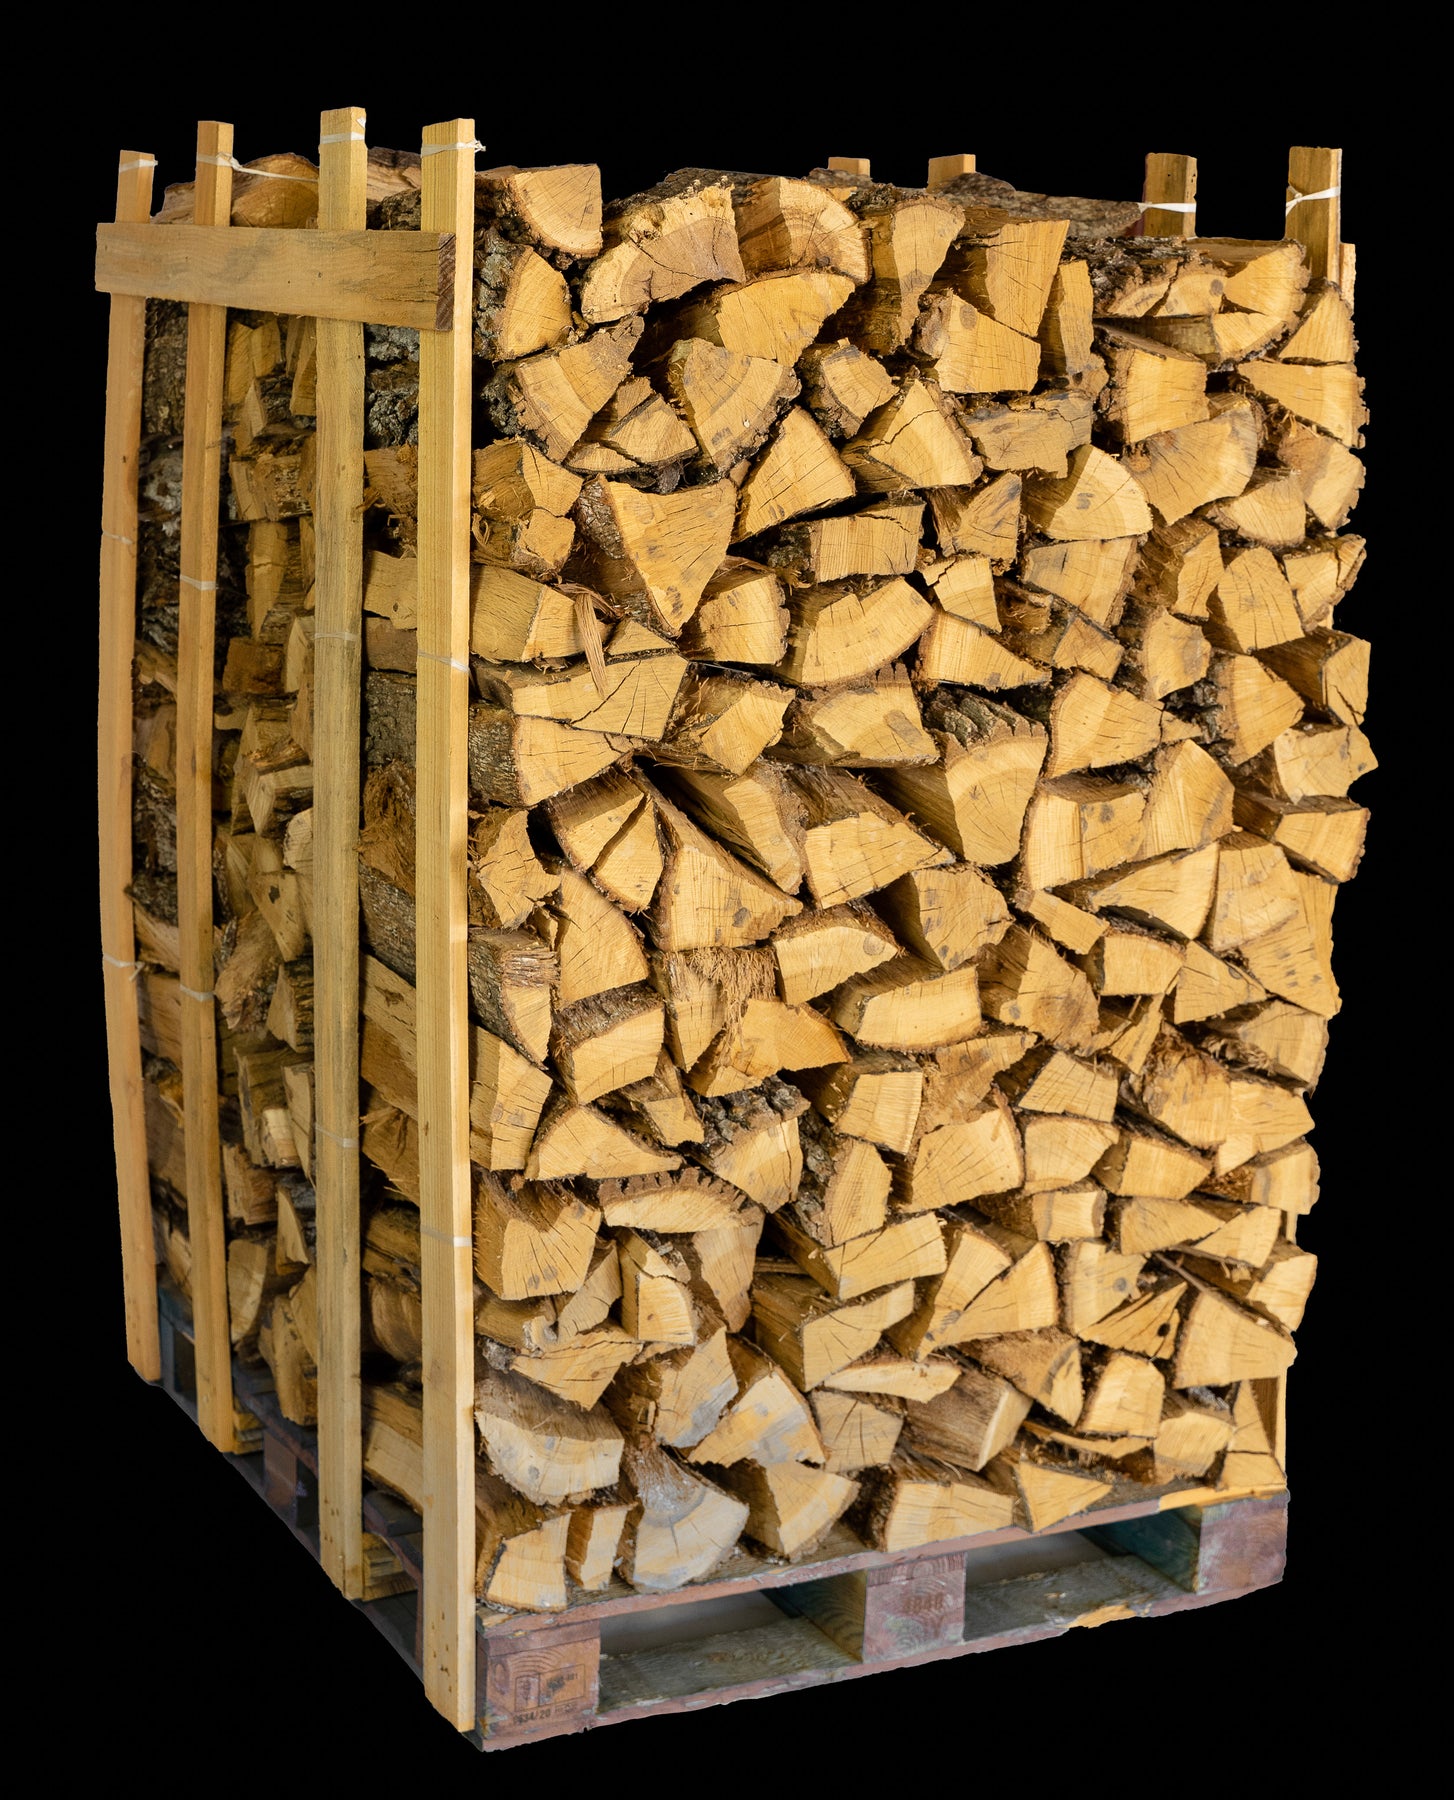 10# Red Oak Wood Chips For Smoking & BBQ Grilling - Minnesota Firewood